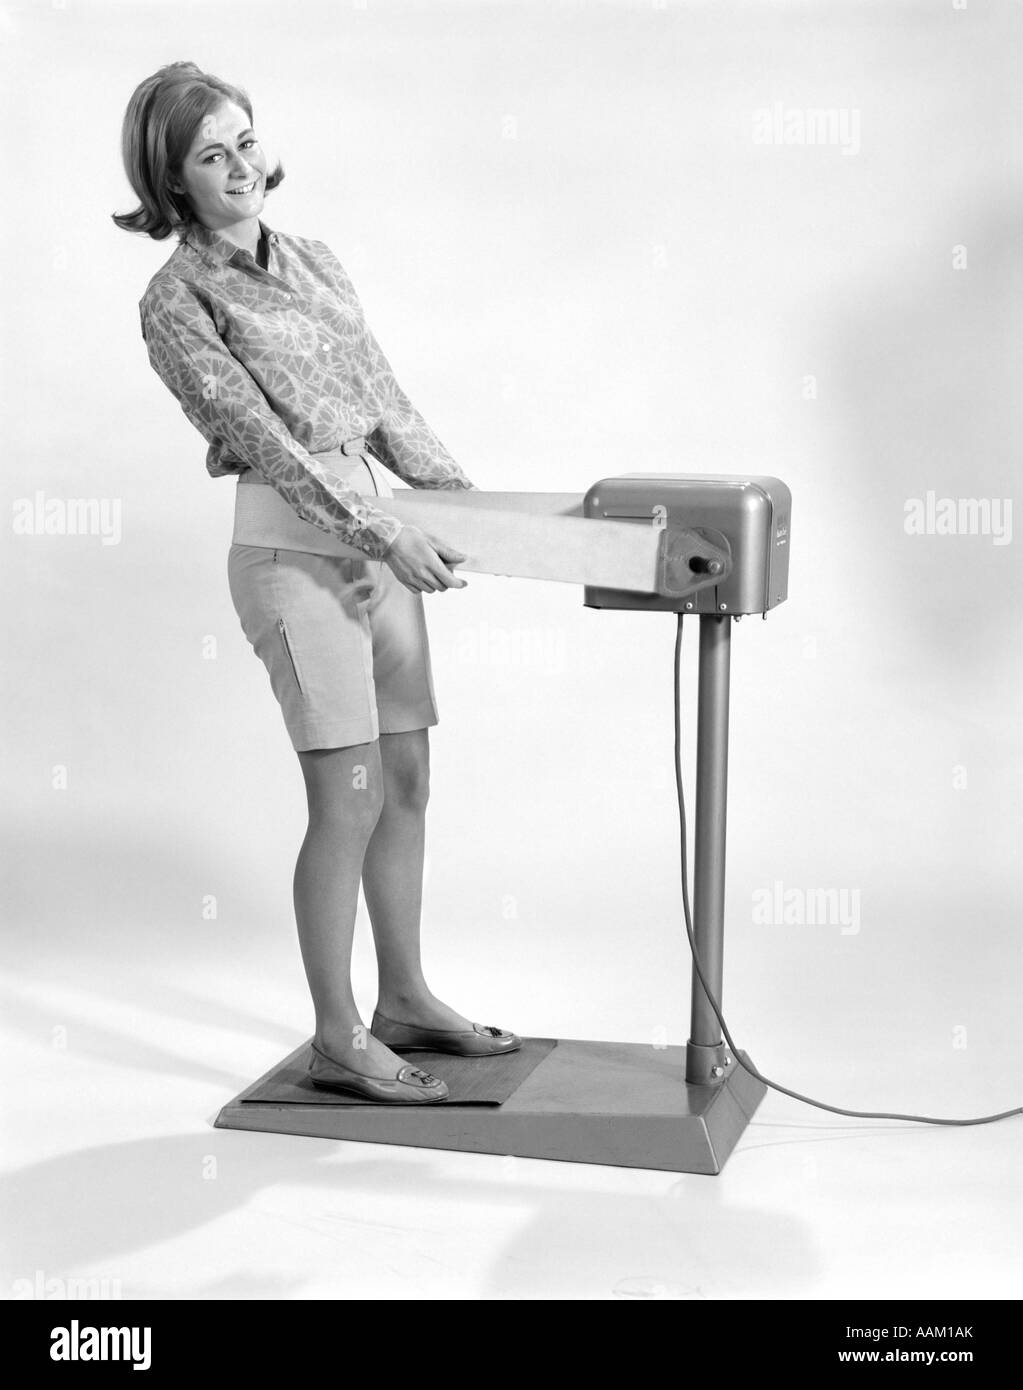 1960s SMILING YOUNG WOMAN STANDING ON WEIGHT REDUCING VIBRATING EXERCISE MACHINE LOOKING AT CAMERA Stock Photo